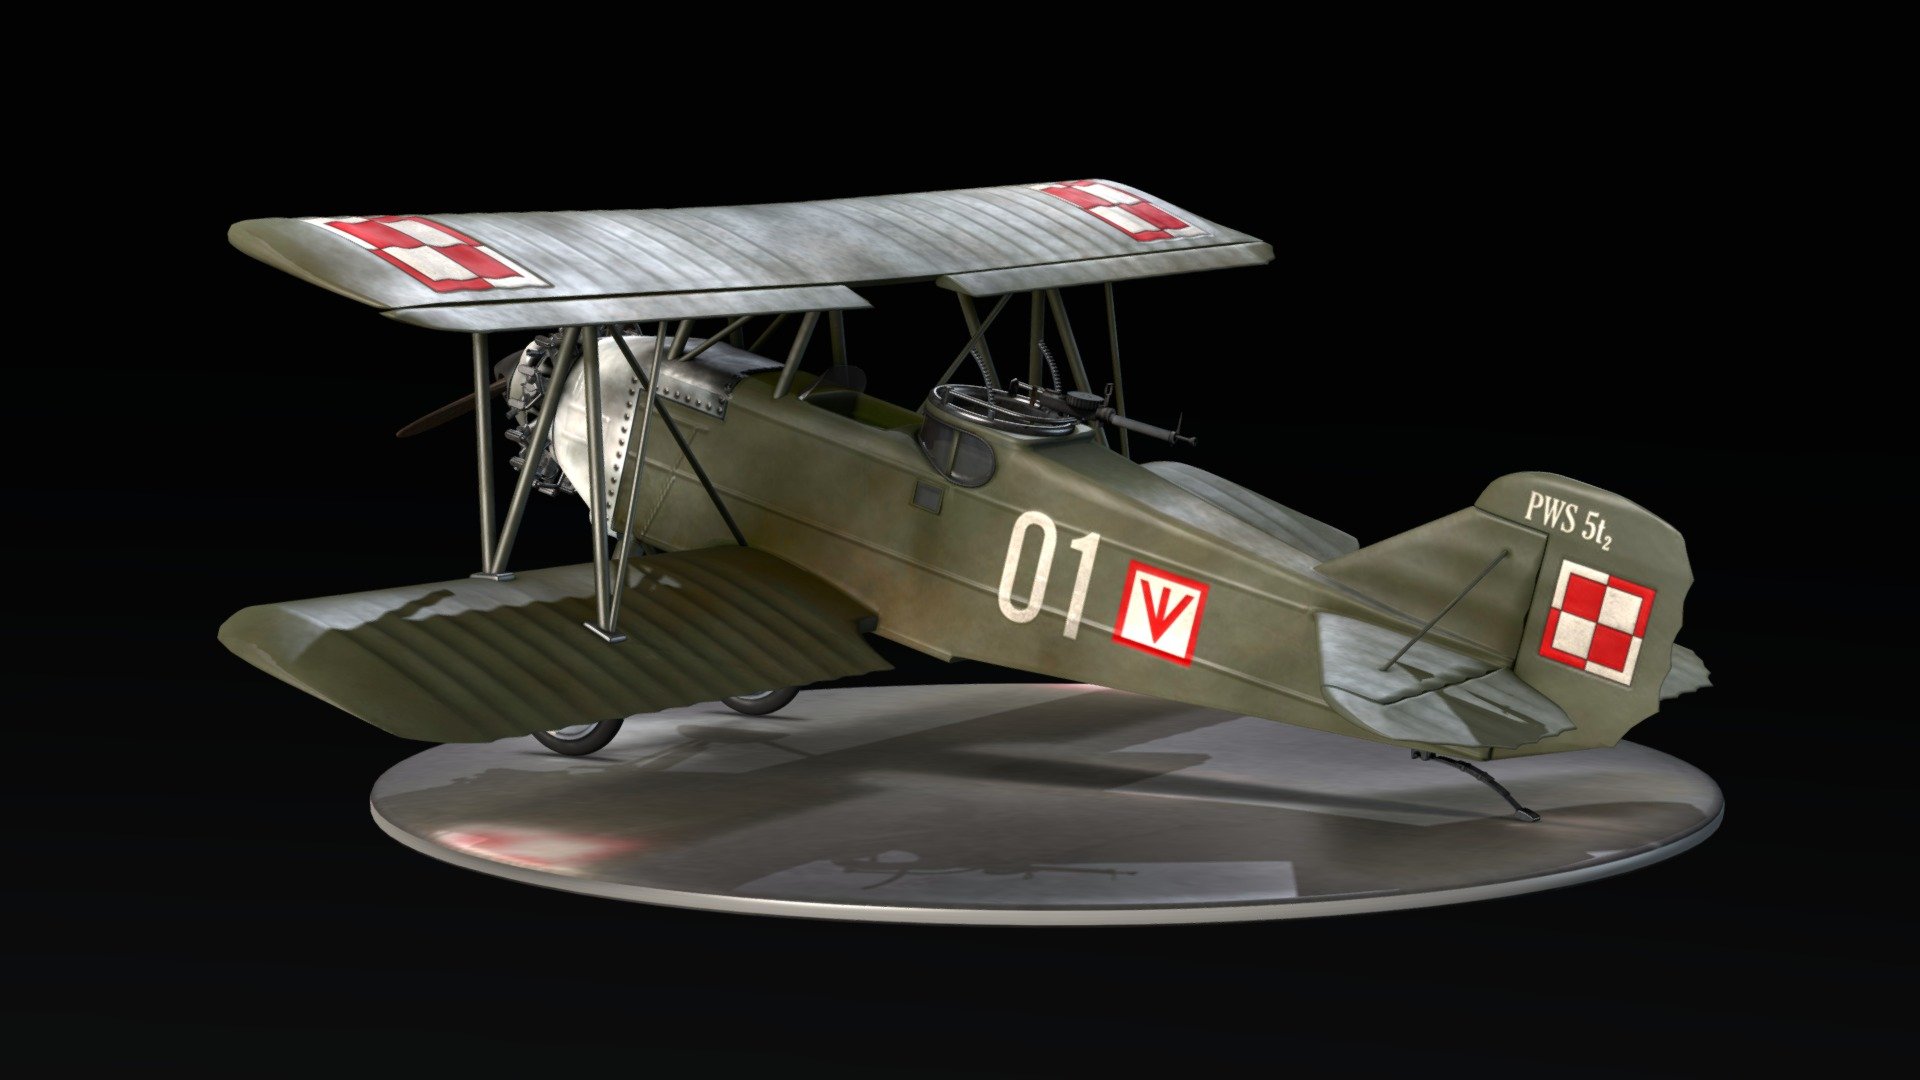 Polish liaison aircraft, developed in 1928 by PWS (Podlasie Aircraft Factory).

This is my first airplane model. In April 2017 I made the same plane from the beginning, with new textures: https://skfb.ly/67rx6 - PWS 5t2 - 3D model by Agnieszka 3d model